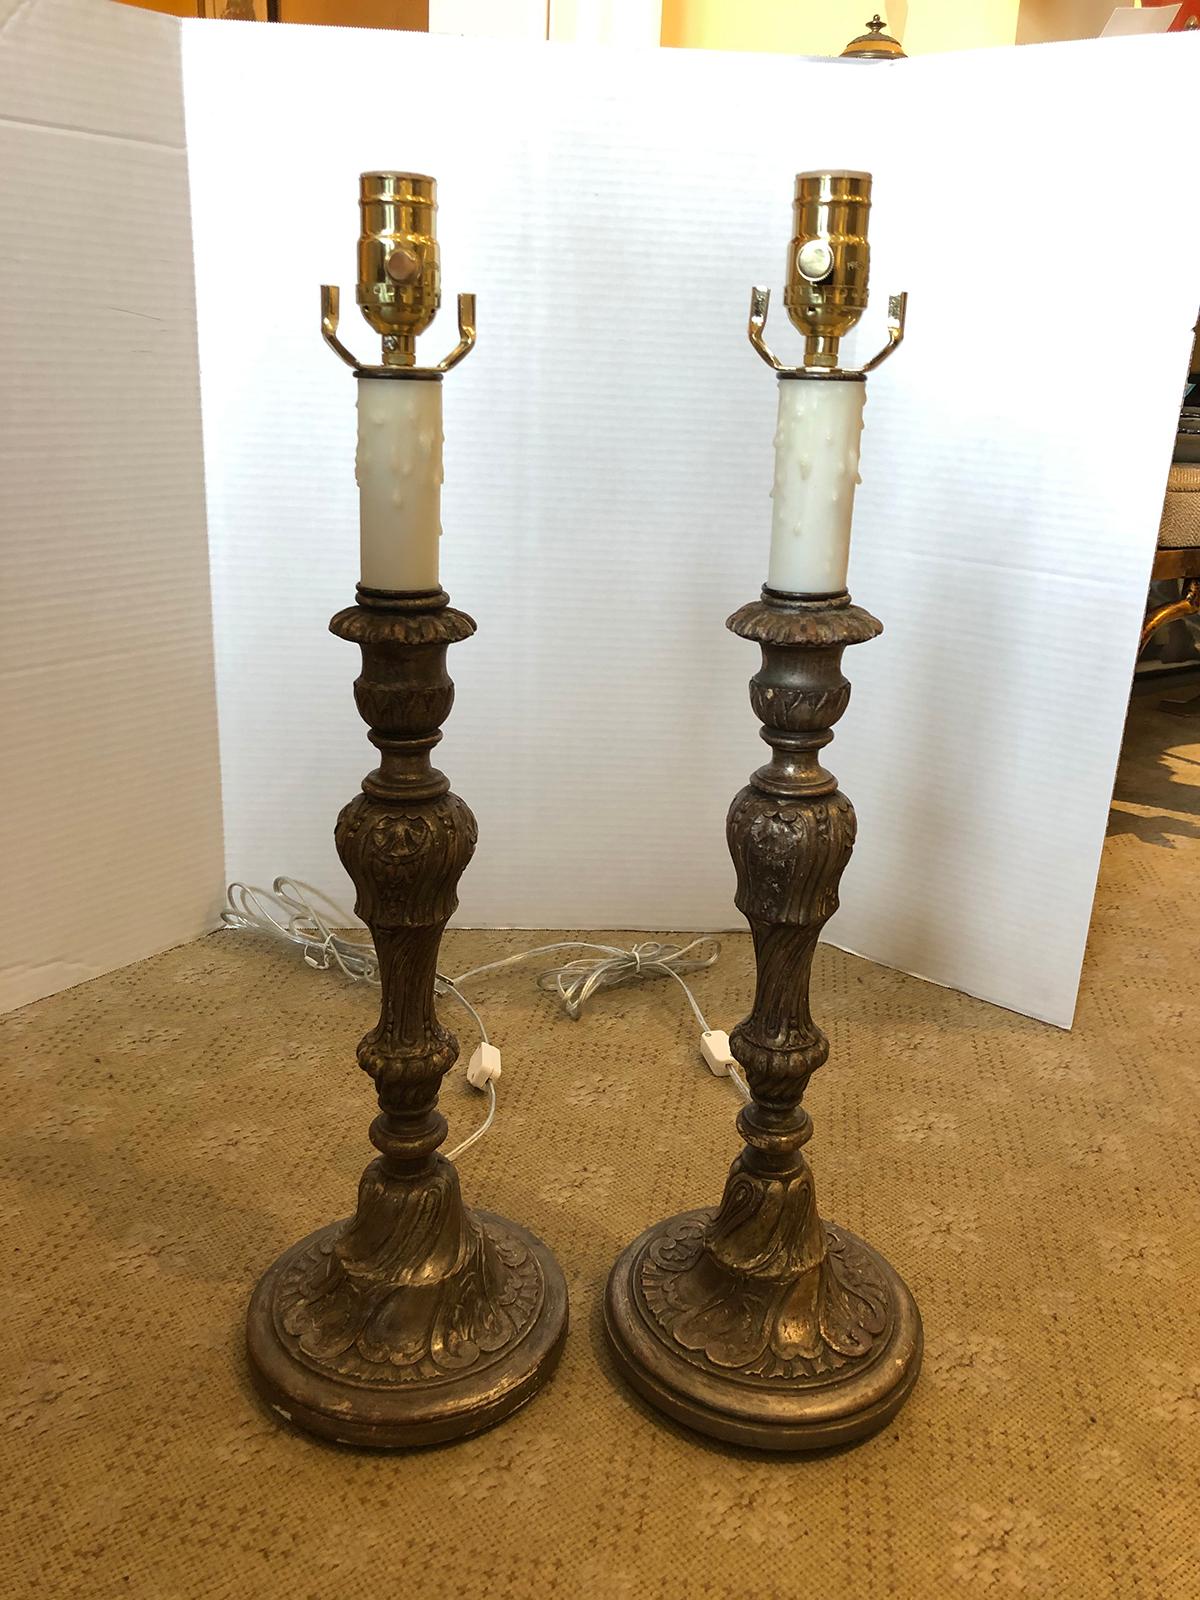 Pair of early 20th century Italian silver gilt candlestick lamps.